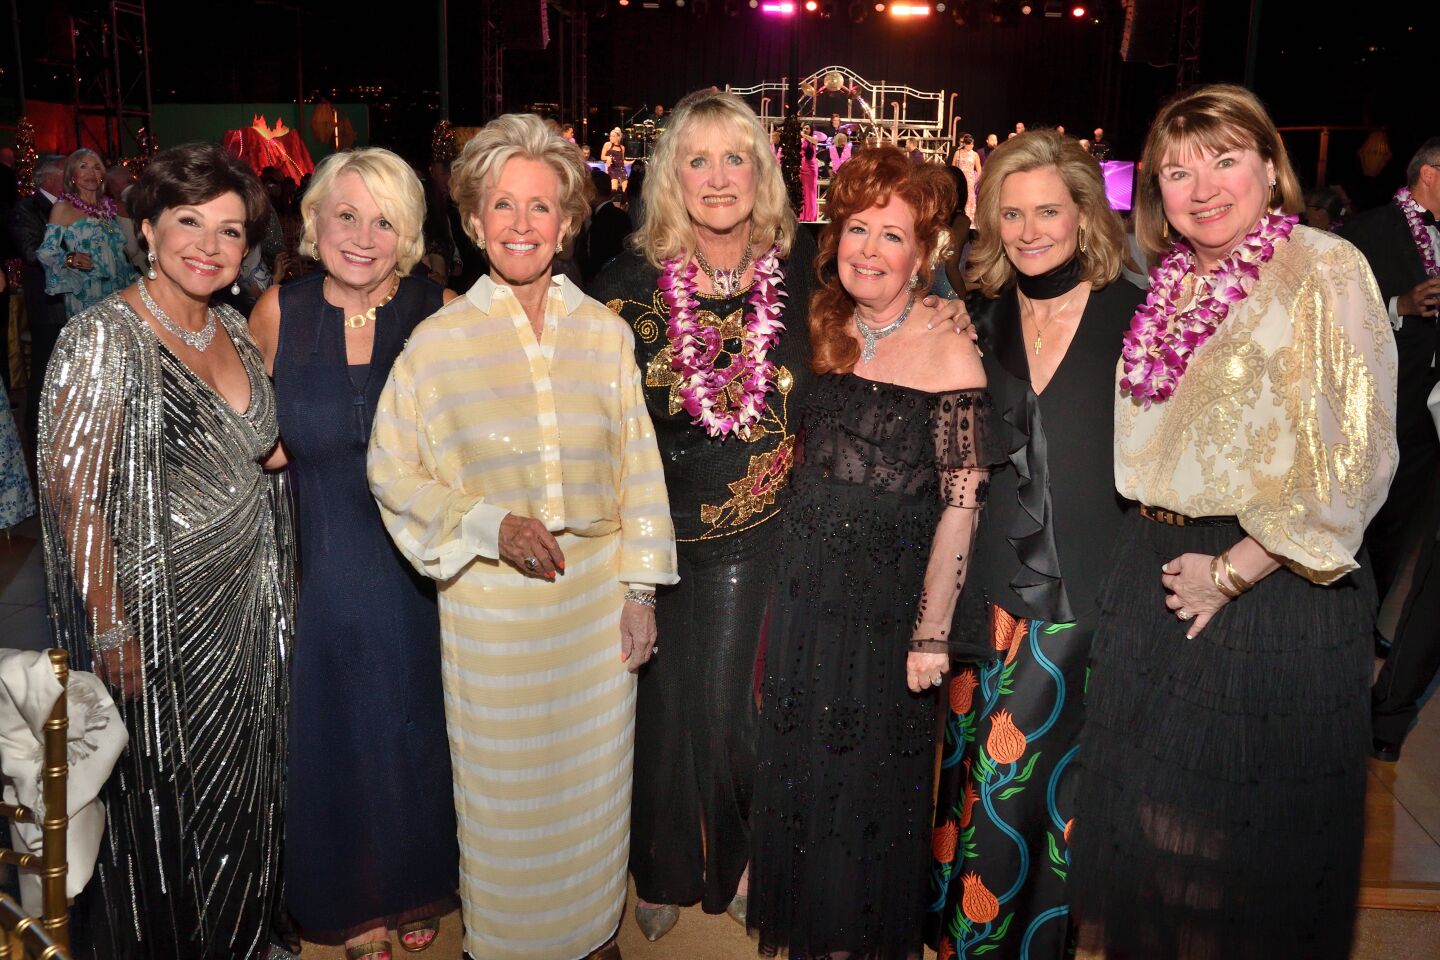 Annie Malcolm, Lynette Busby, Donna Allan, Rosemary Rodger, Dianne Bashor, Cathy Andrews and Karen Duvall Burke